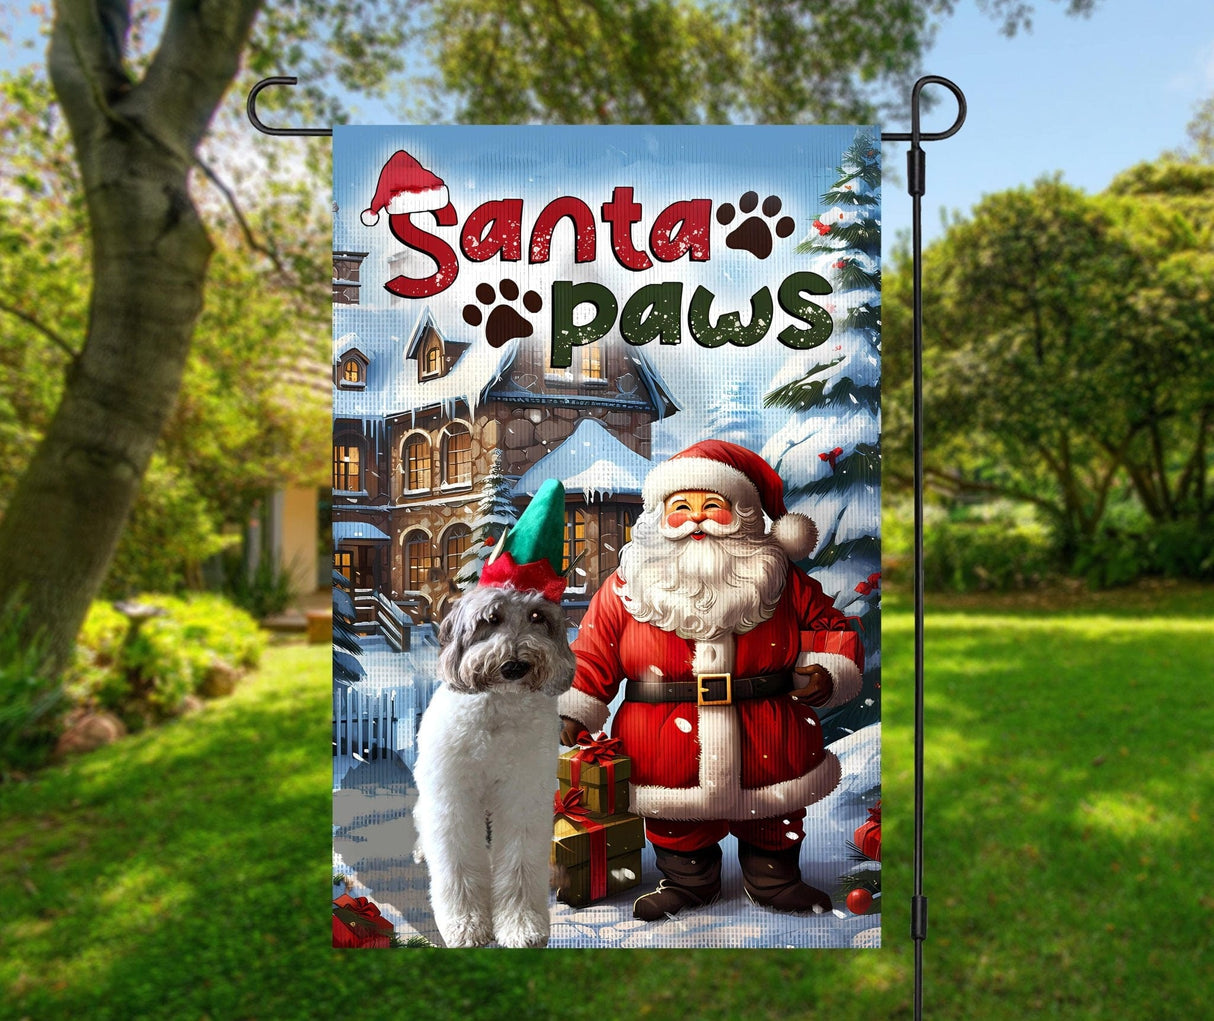 Yard Signs & Flags Dog Lovers - Personalized Santa Paw - Custom Photo Pet Flag